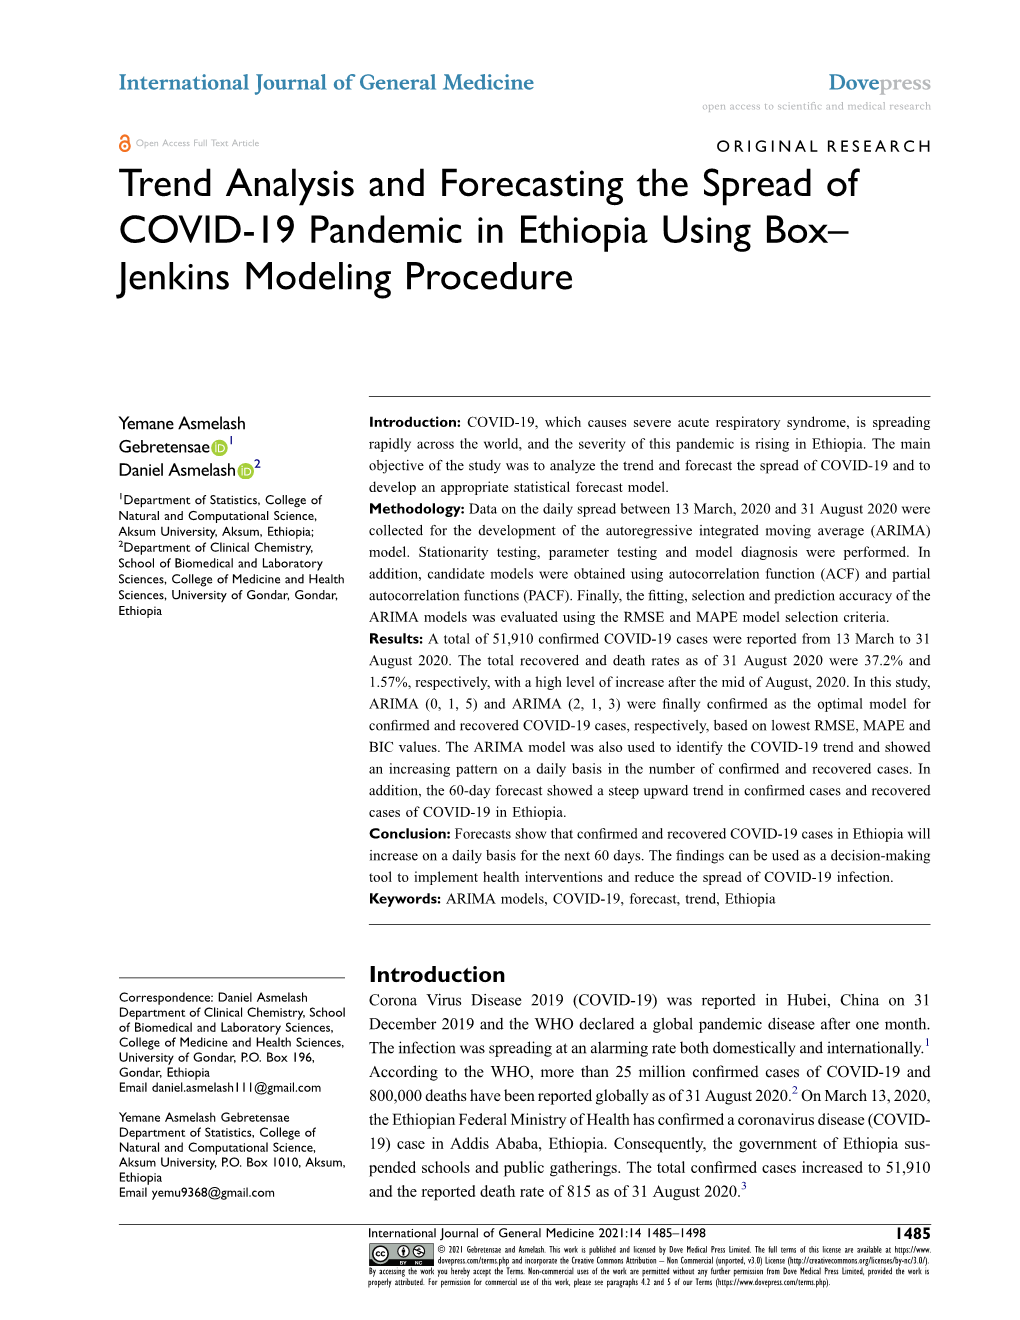 Trend Analysis and Forecasting the Spread of COVID-19 Pandemic in Ethiopia Using Box– Jenkins Modeling Procedure